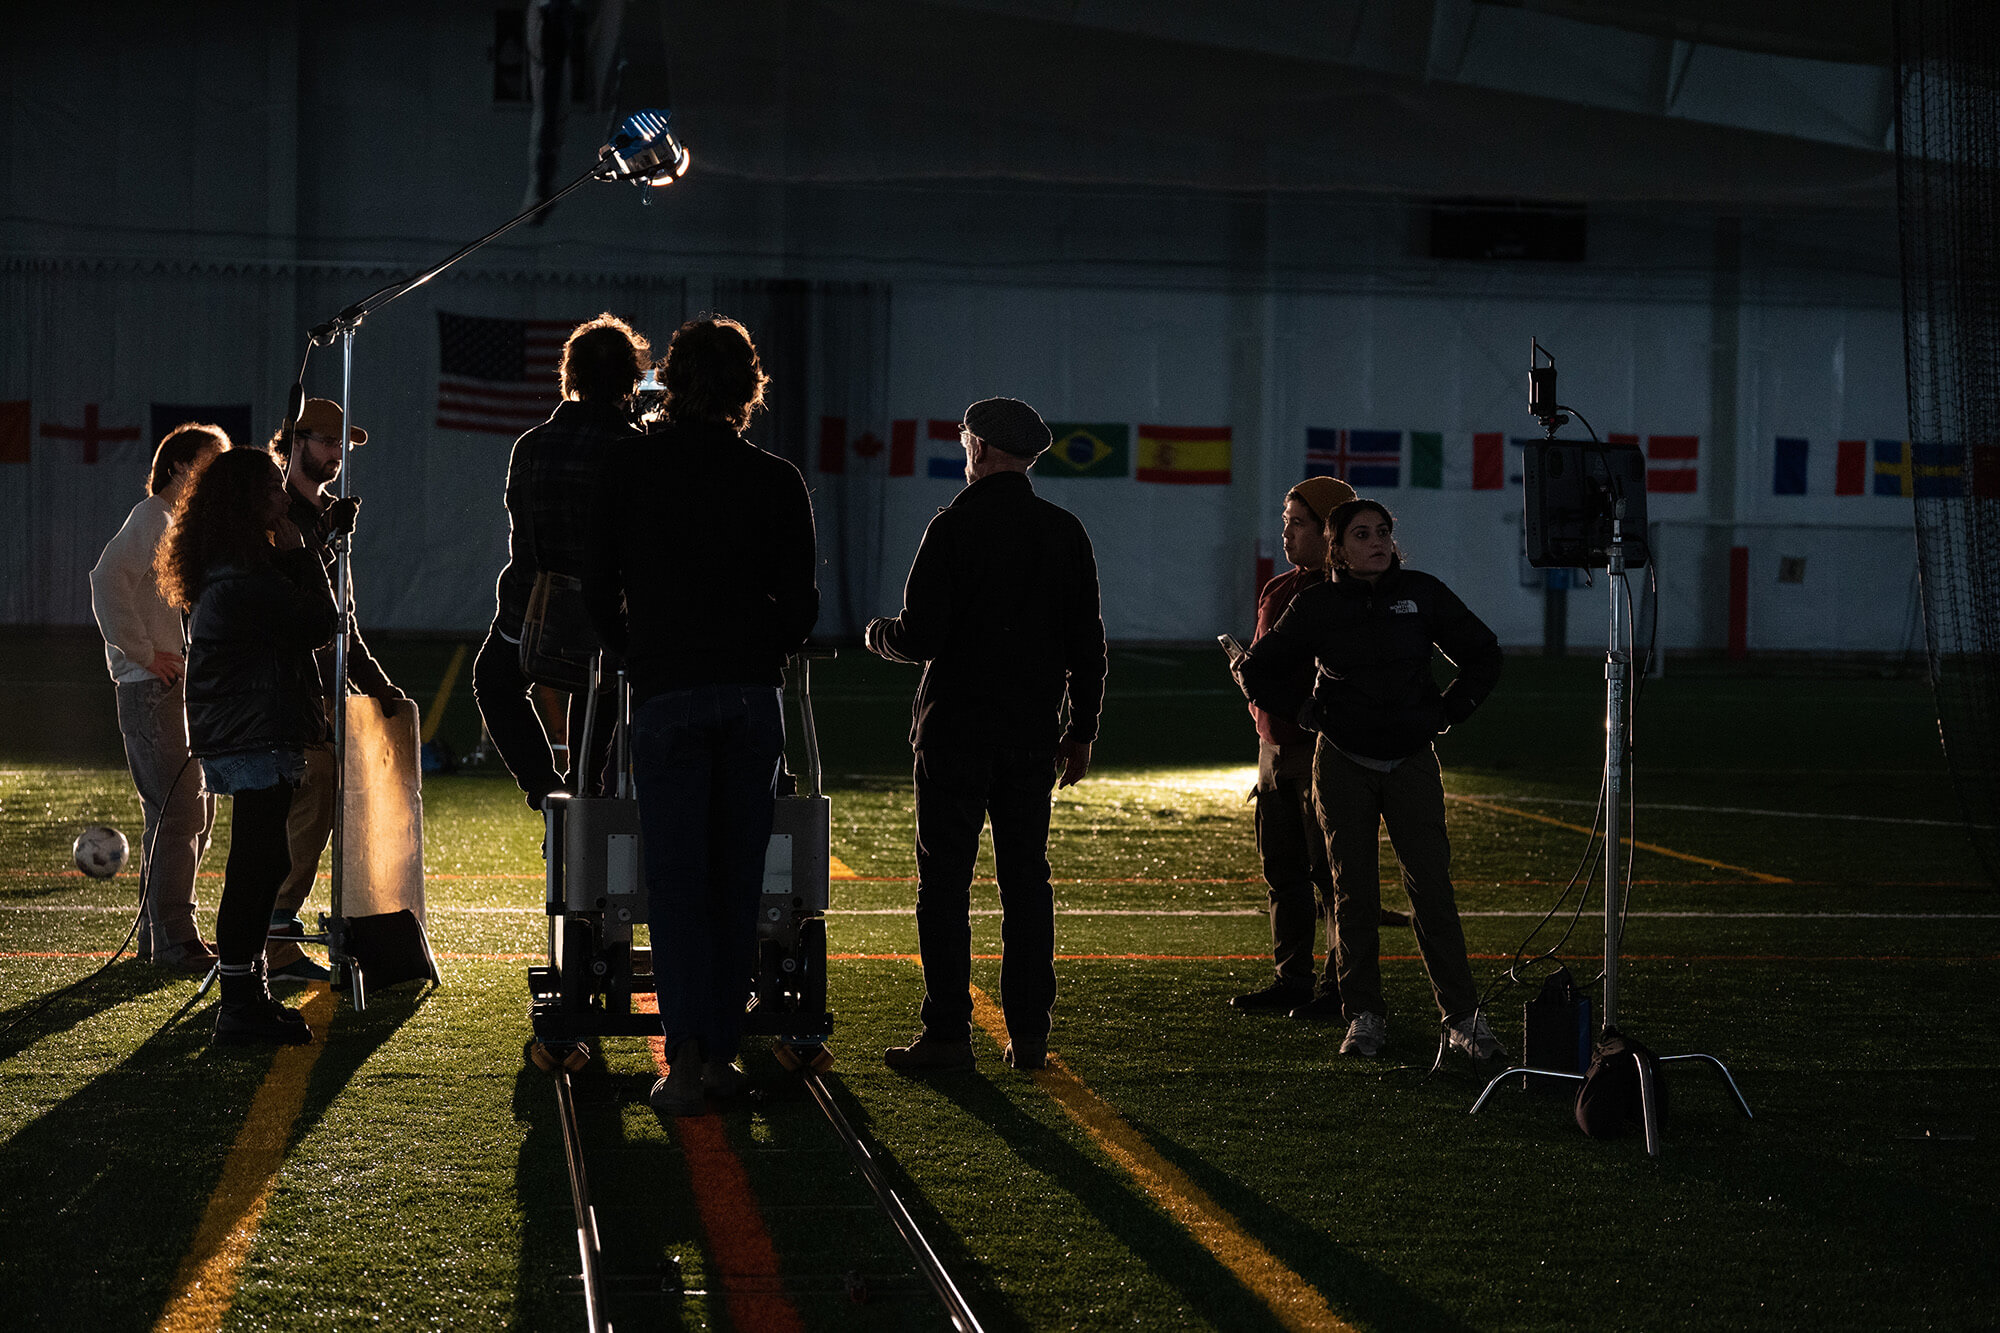 Daniel Pearl, ASC teaching Maine Media students cinematography at the indoor Pitch soccer field - Photo by Alaric Beal